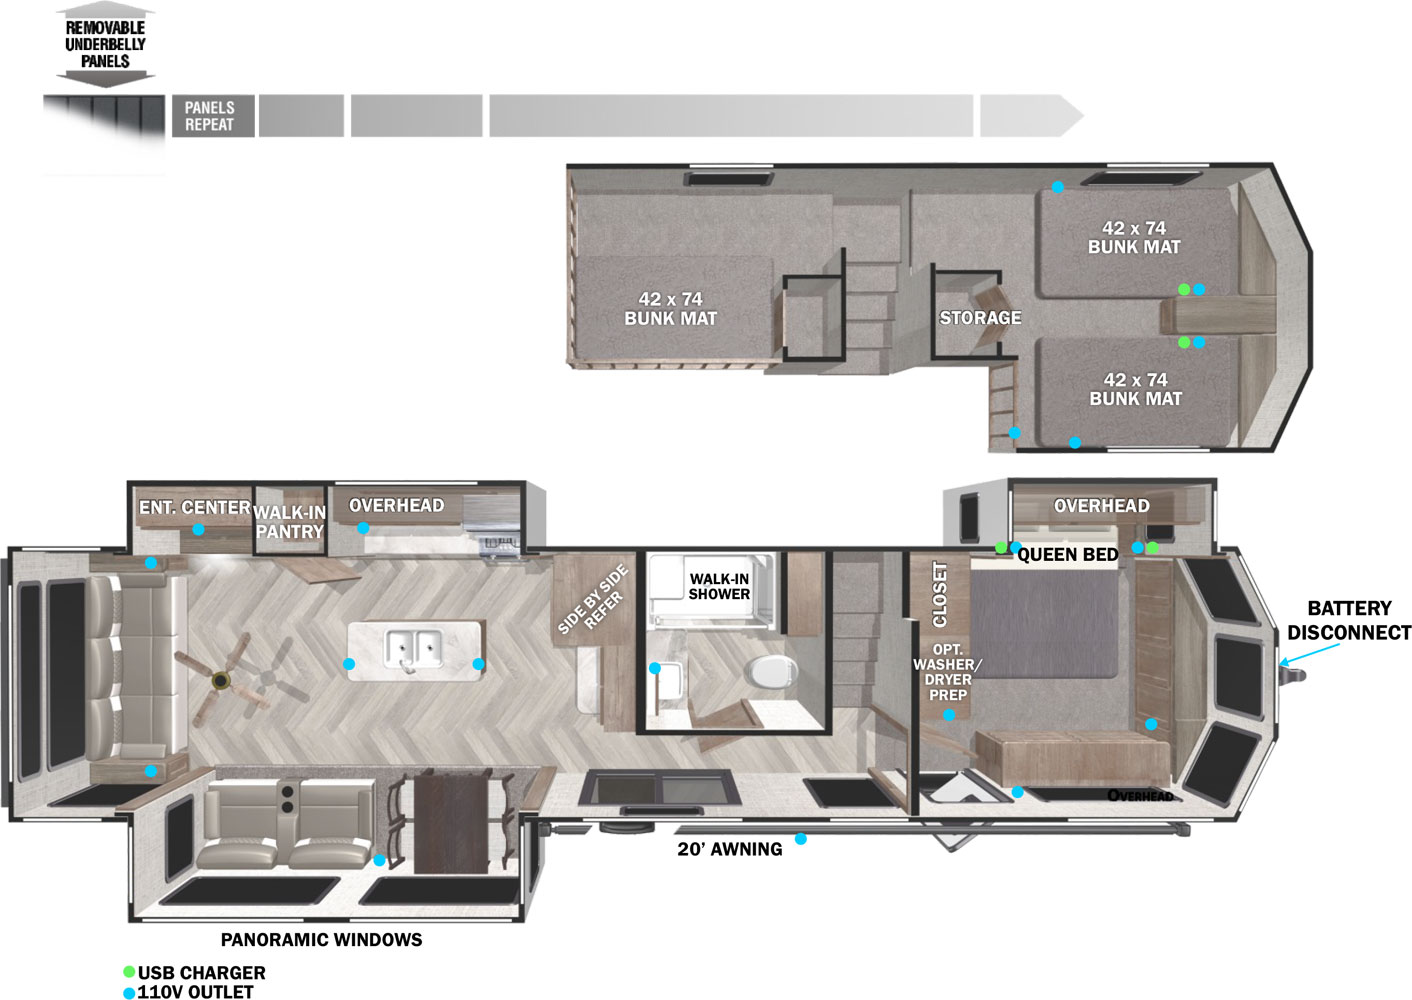 Wildwood Lodge 42DL floorplan. The 42DL has 3 slide outs and two plus entry doors.